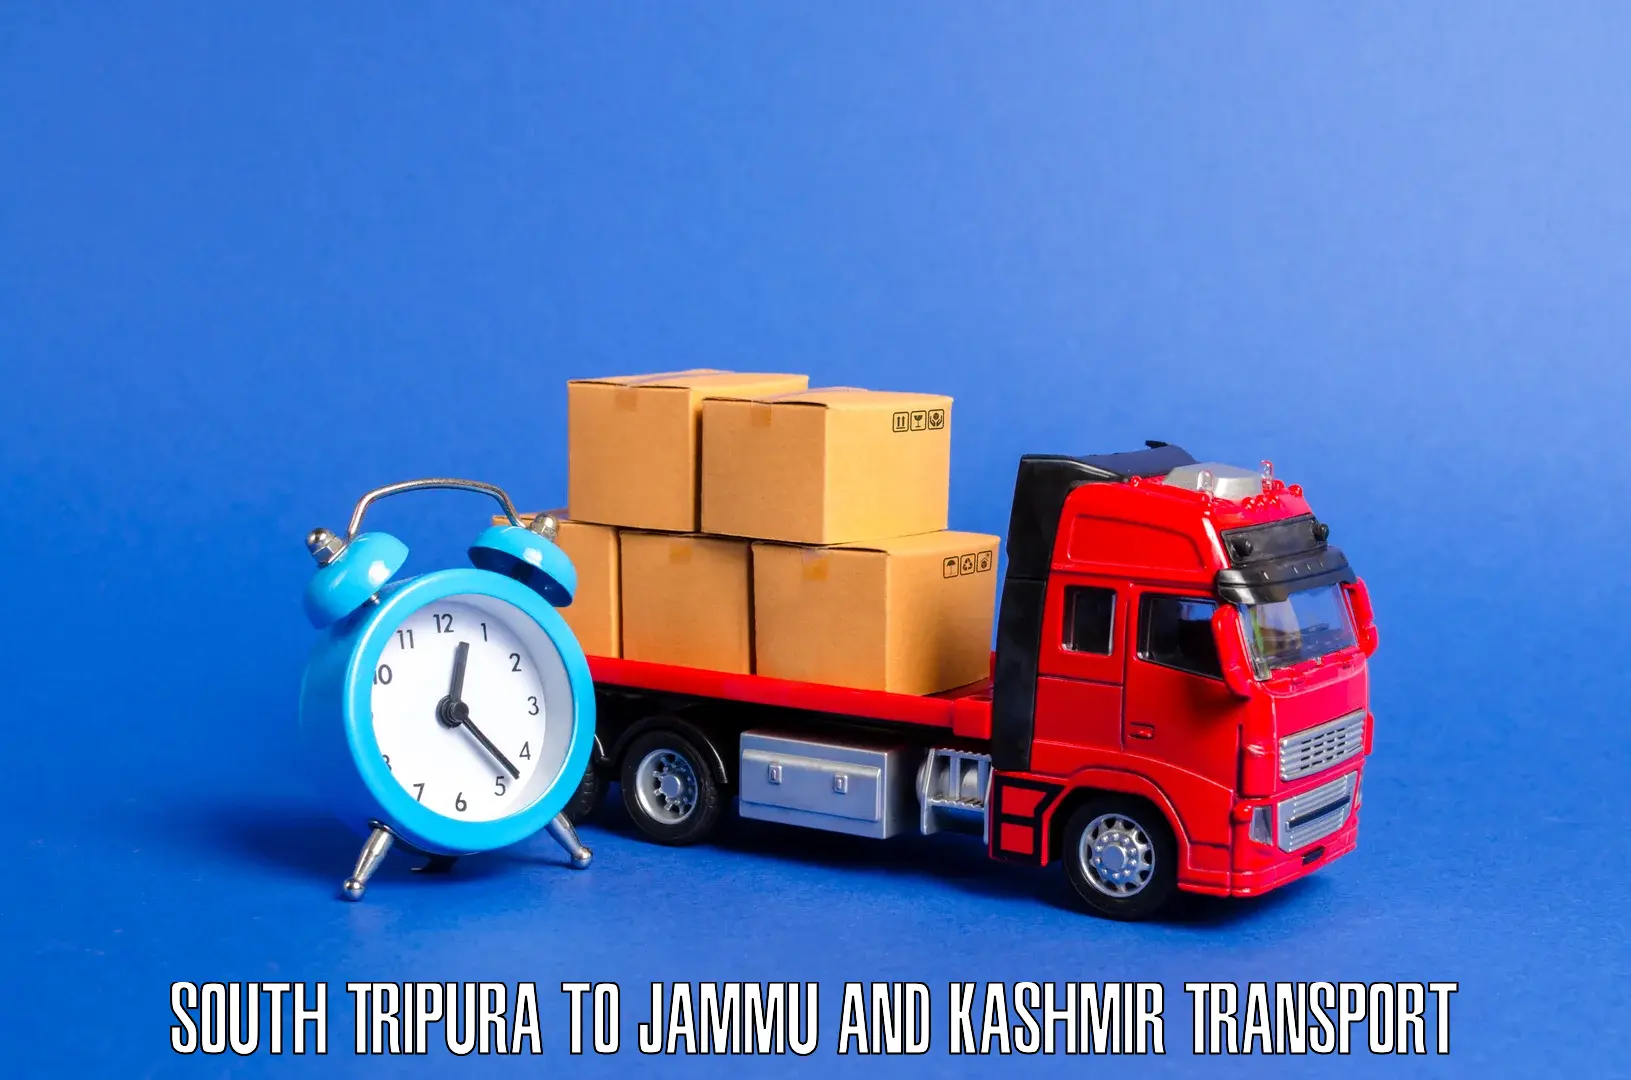 Air freight transport services South Tripura to Katra